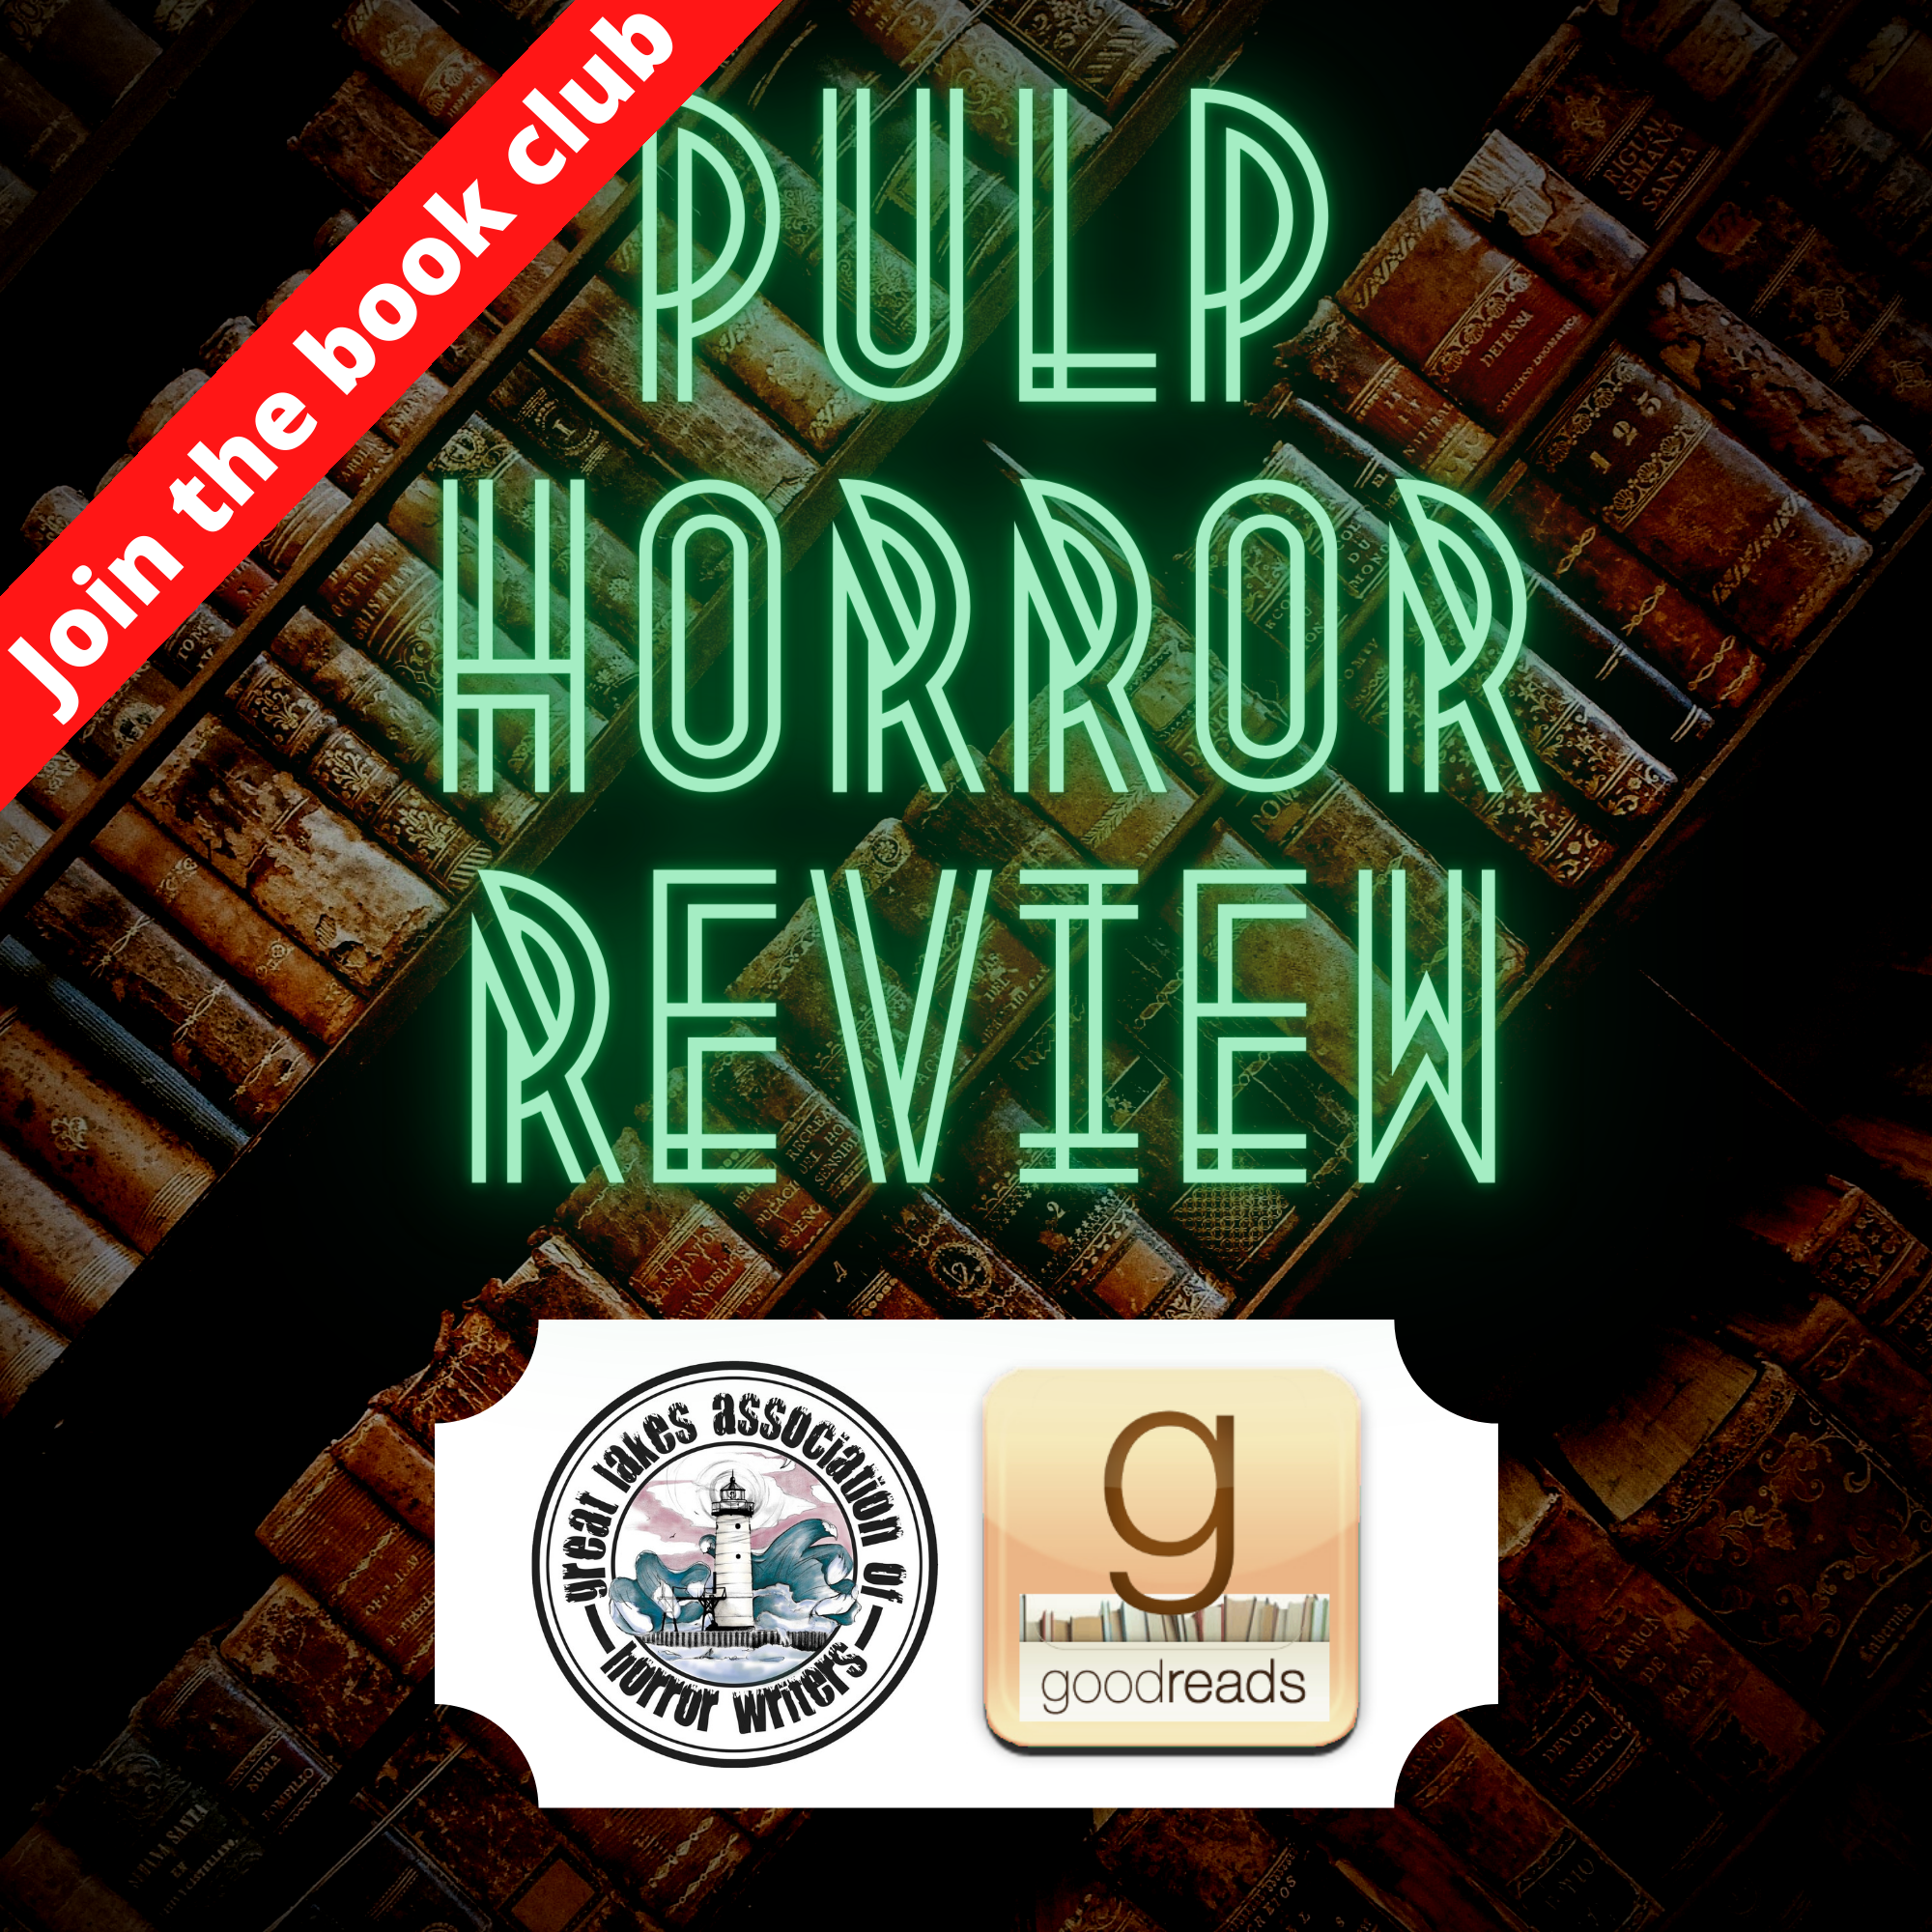 The GLAHW Pulp Horror Review